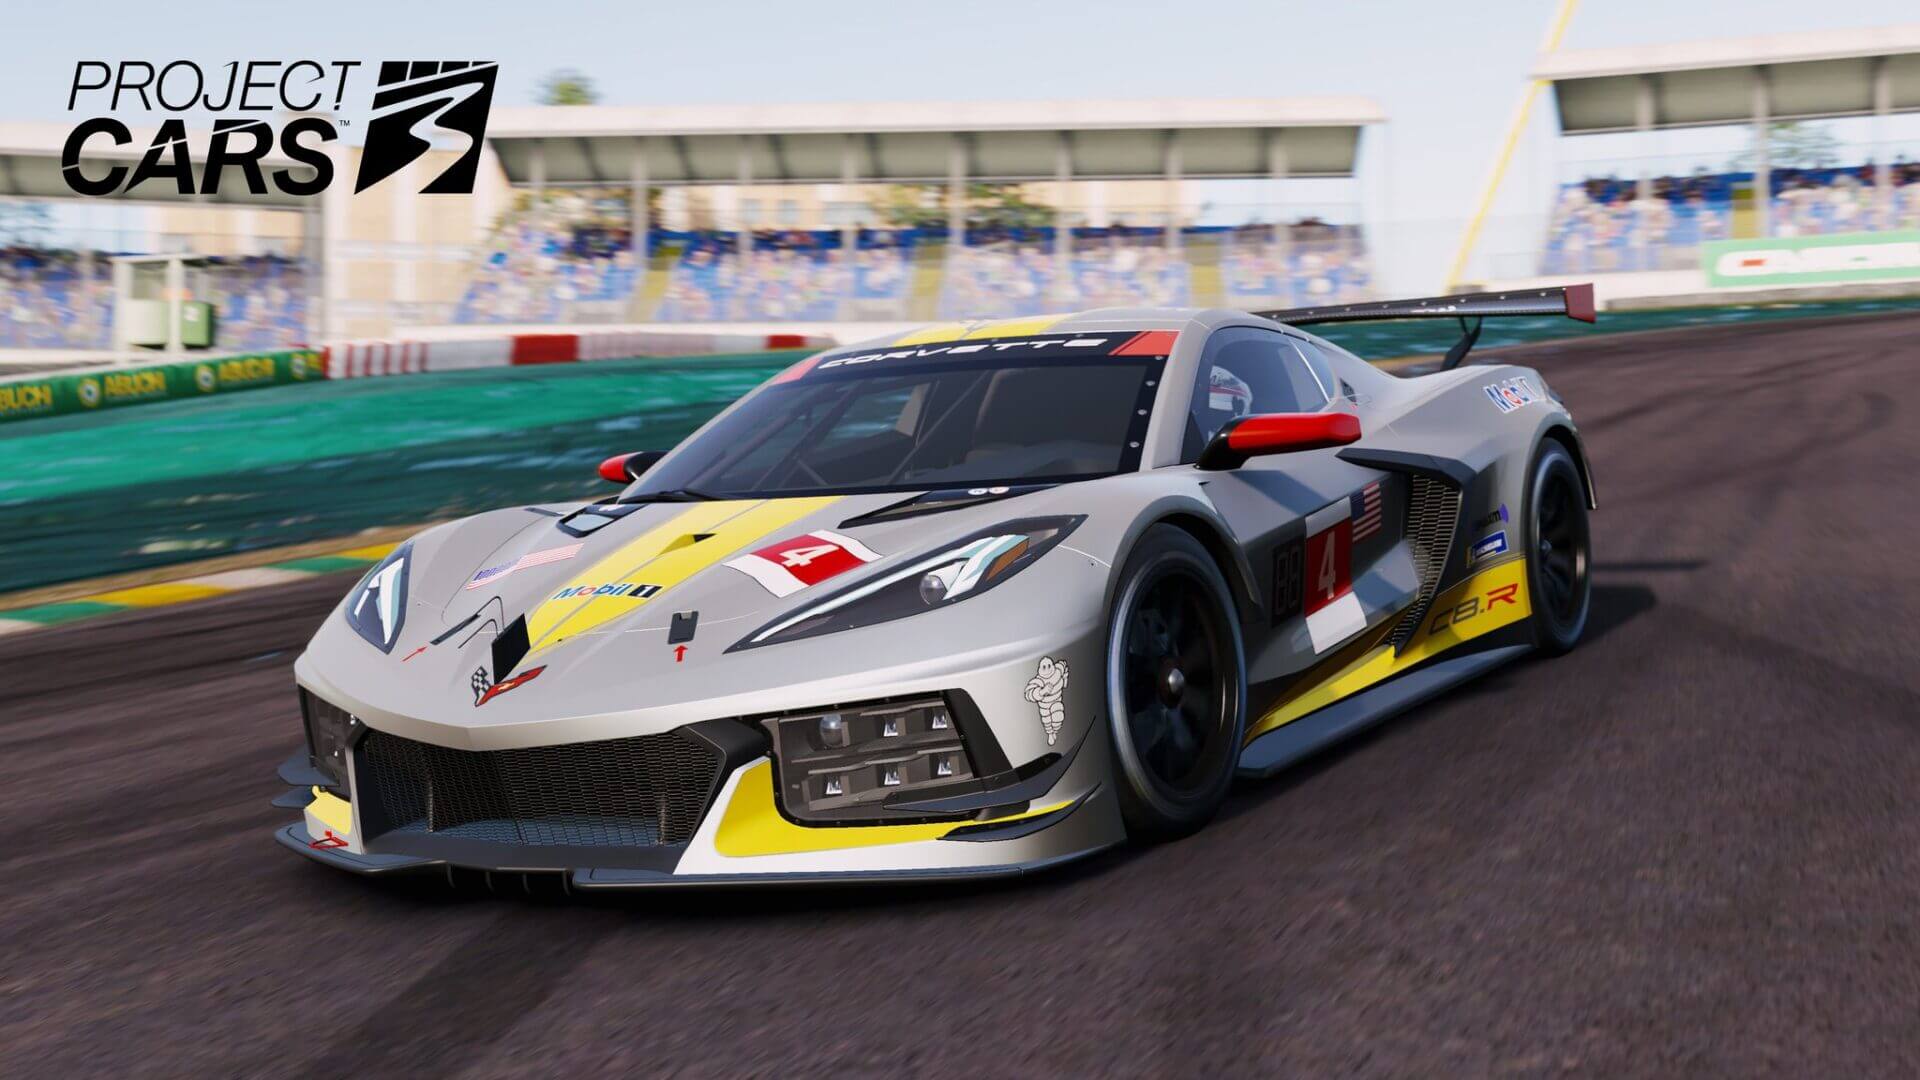 PS4 Project Cars